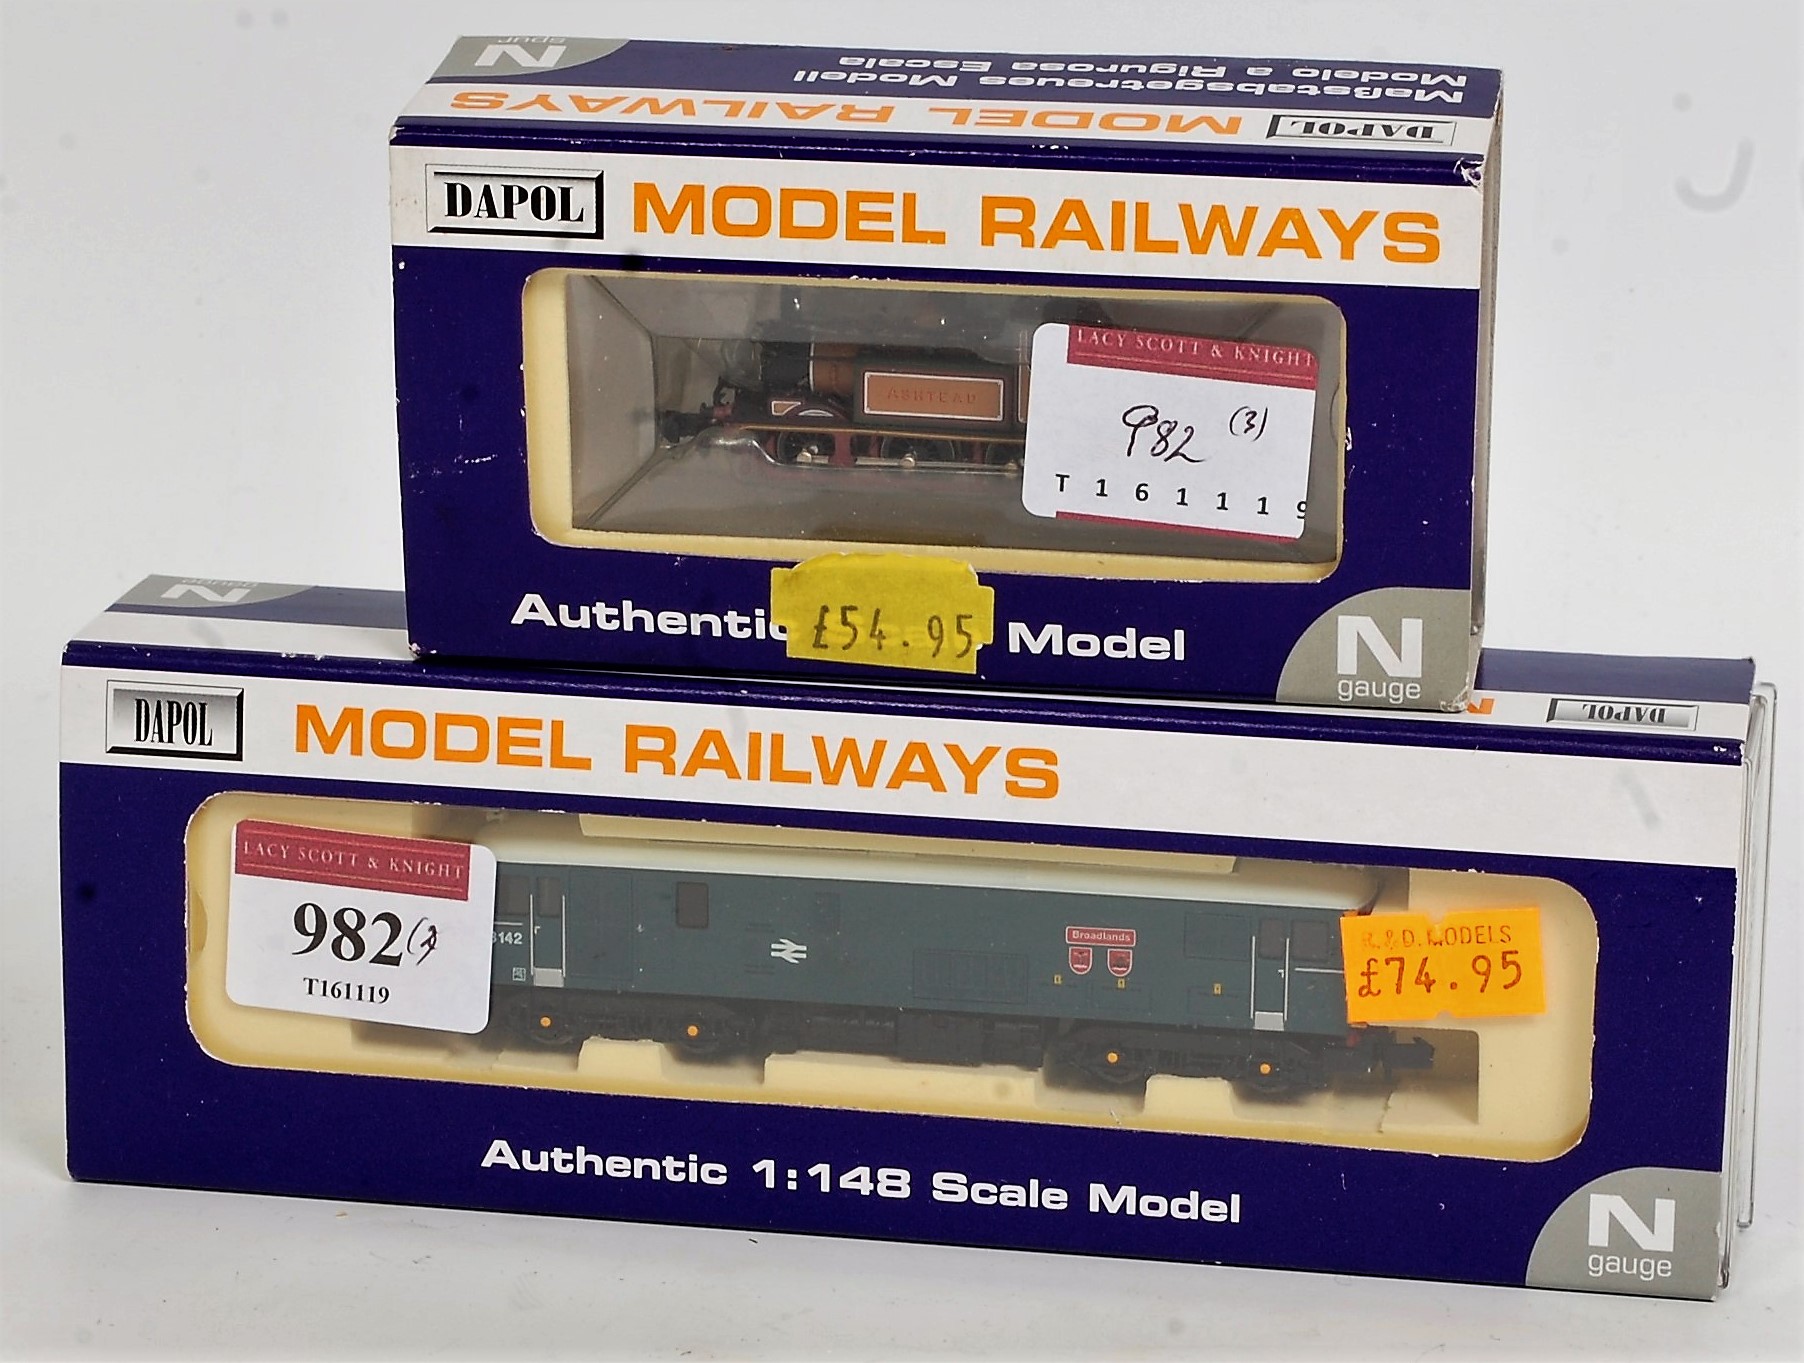 Two Dapol 'N' gauge locos; ND-036A class 73, 73142 Broadlands (M-BM) with ND-100J 0-6-0 Terrier tank